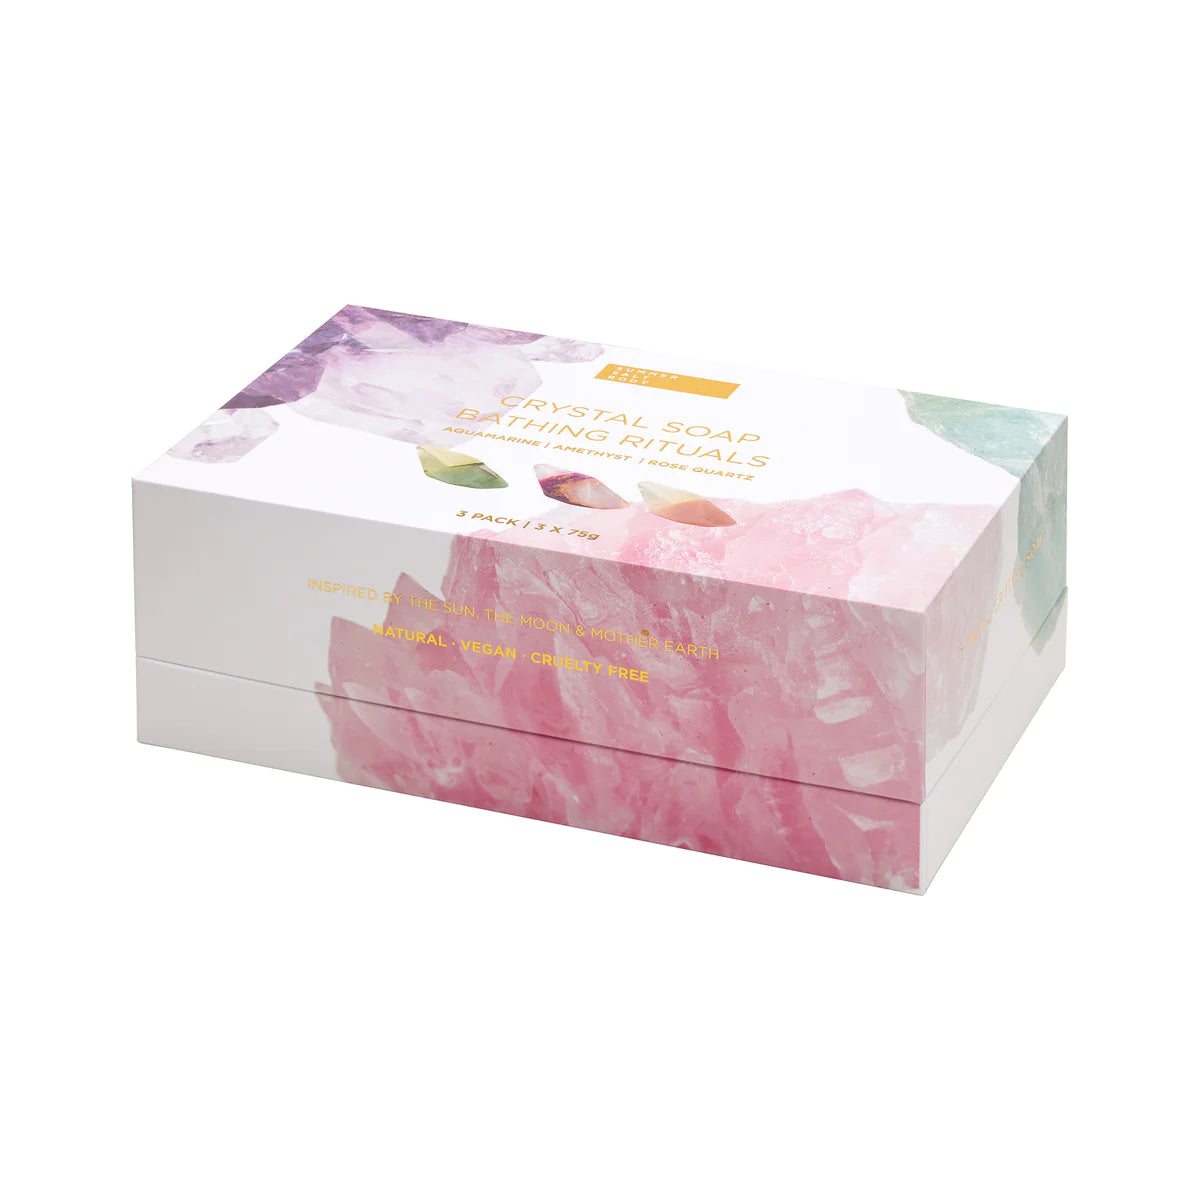 Crystal Soap Bathing Rituals 3 Pack